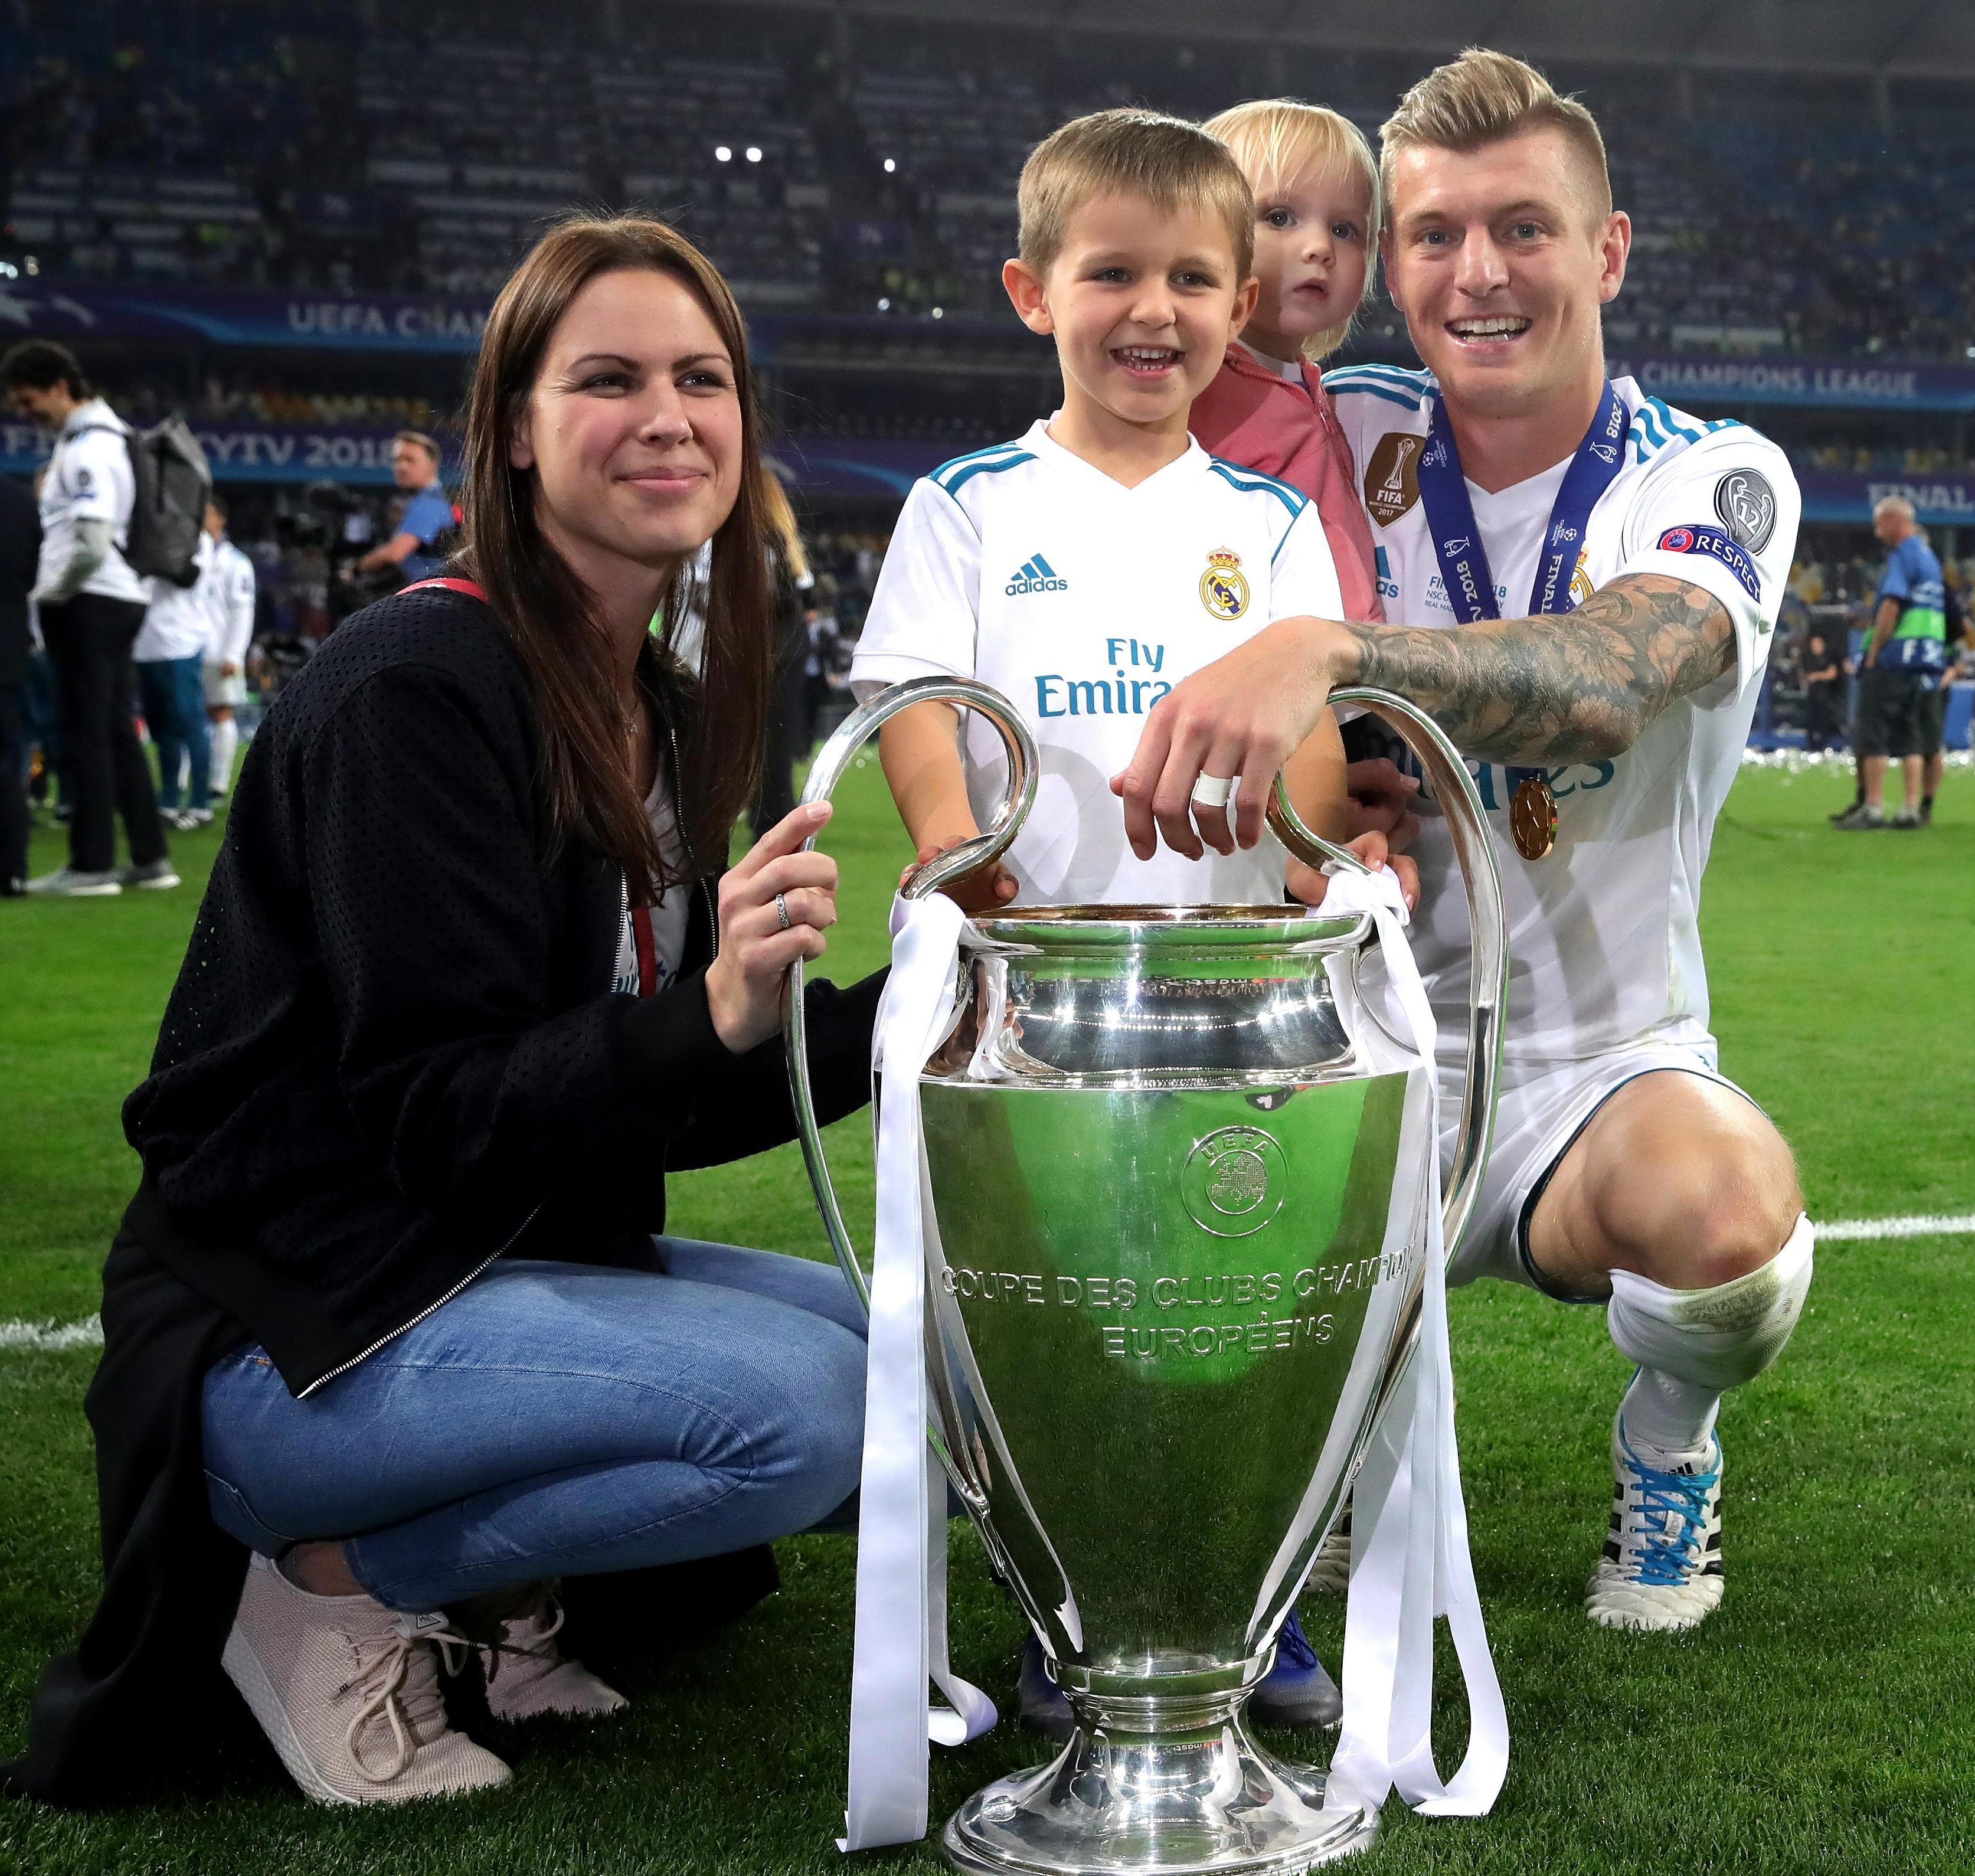 Real Madrid ace Toni Kroos inks huge tattoo of daughter wearing pink sunglasses onto arm | The Sun